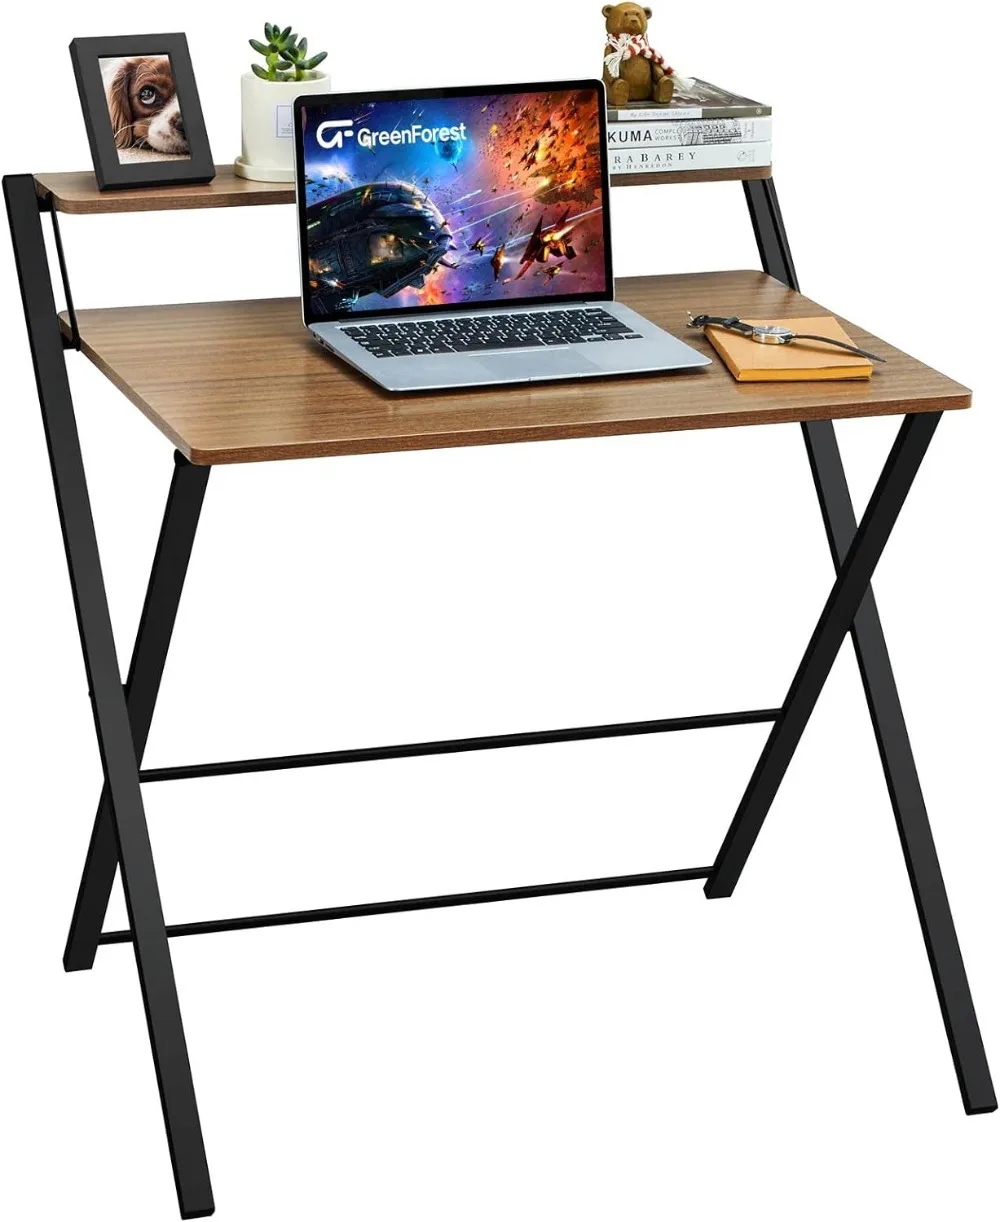 GreenForest Small Folding Desk No Assembly Required, Fully Unfold 27.3 x 22 inch 2-Tier Computer Desk original 5 7 inch lcd mc57t01h 100% original industrial equipment lcd display perfect working fully tested